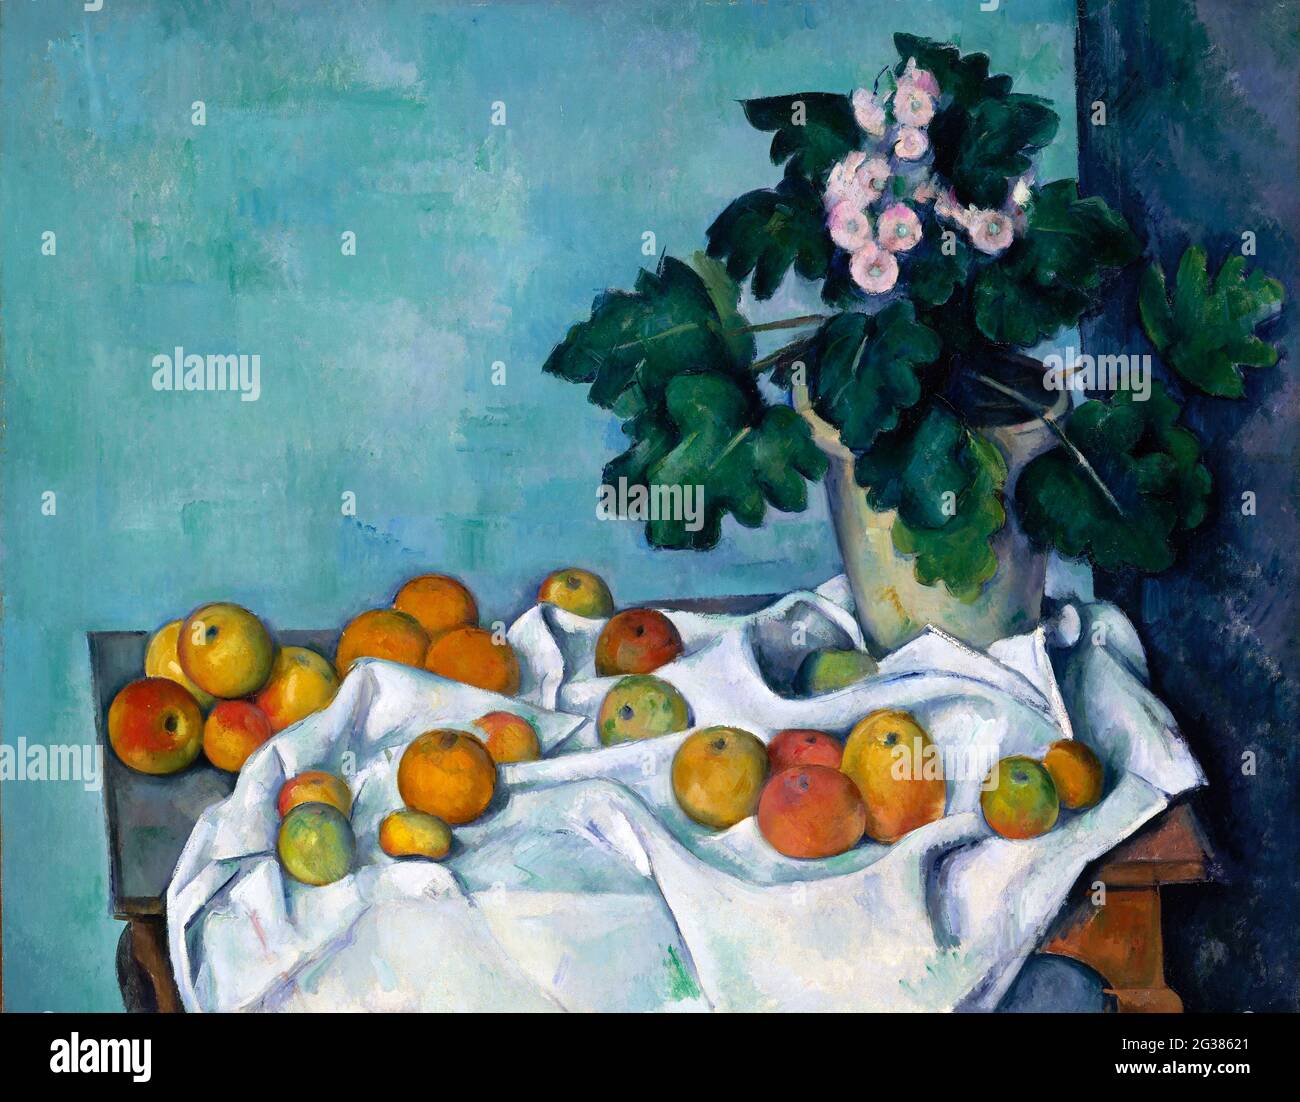 Still Life with Apples and a Pot of Primroses by Paul Cezanne (1839-1906), oil on canvas, c.1890 Stock Photo